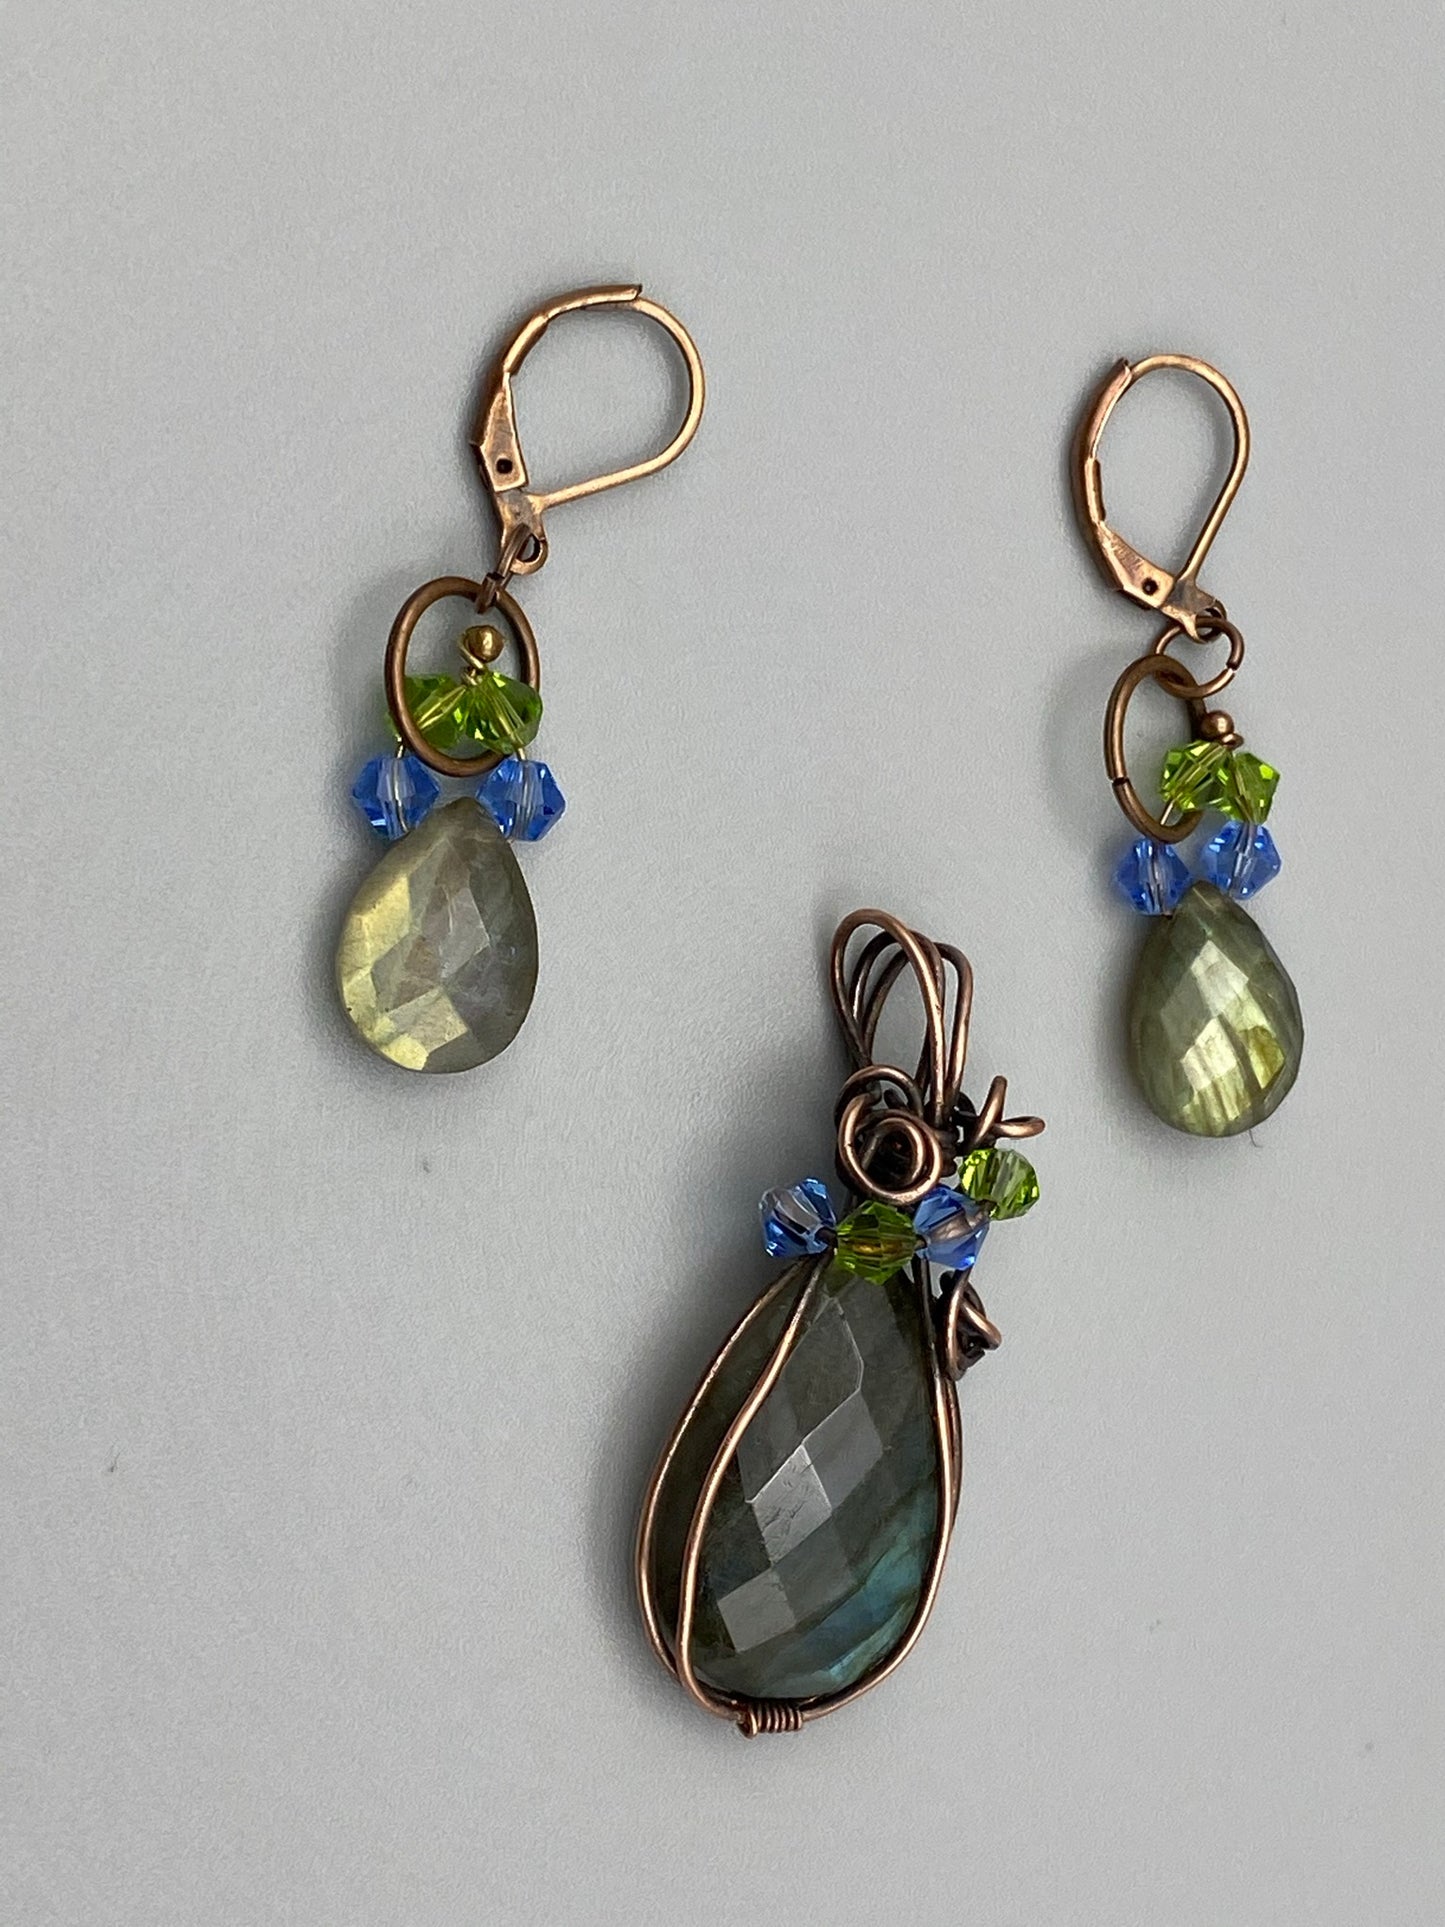 Labradorite Faceted Pendant and Matching Earrings Set